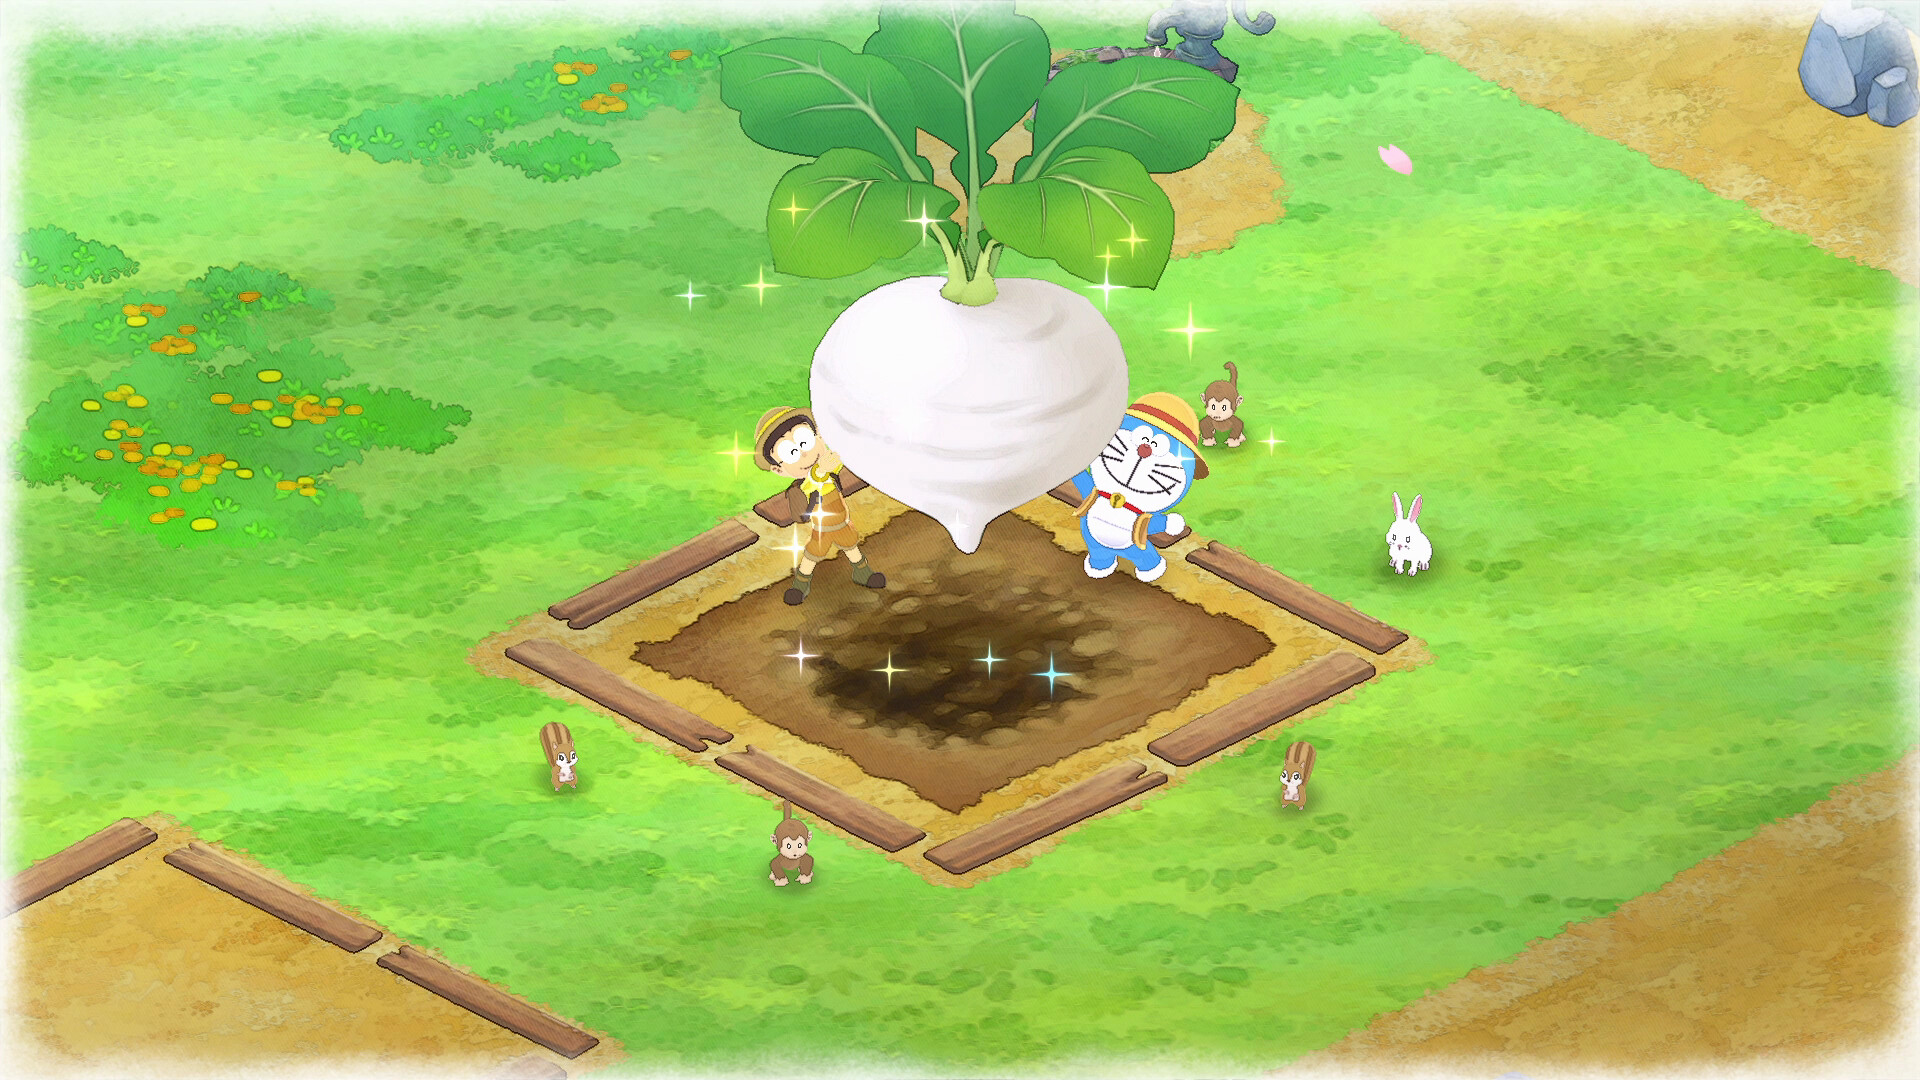 DORAEMON STORY OF SEASONS: Friends Of The Great Kingdom Deluxe Edition EU V2 Steam Altergift